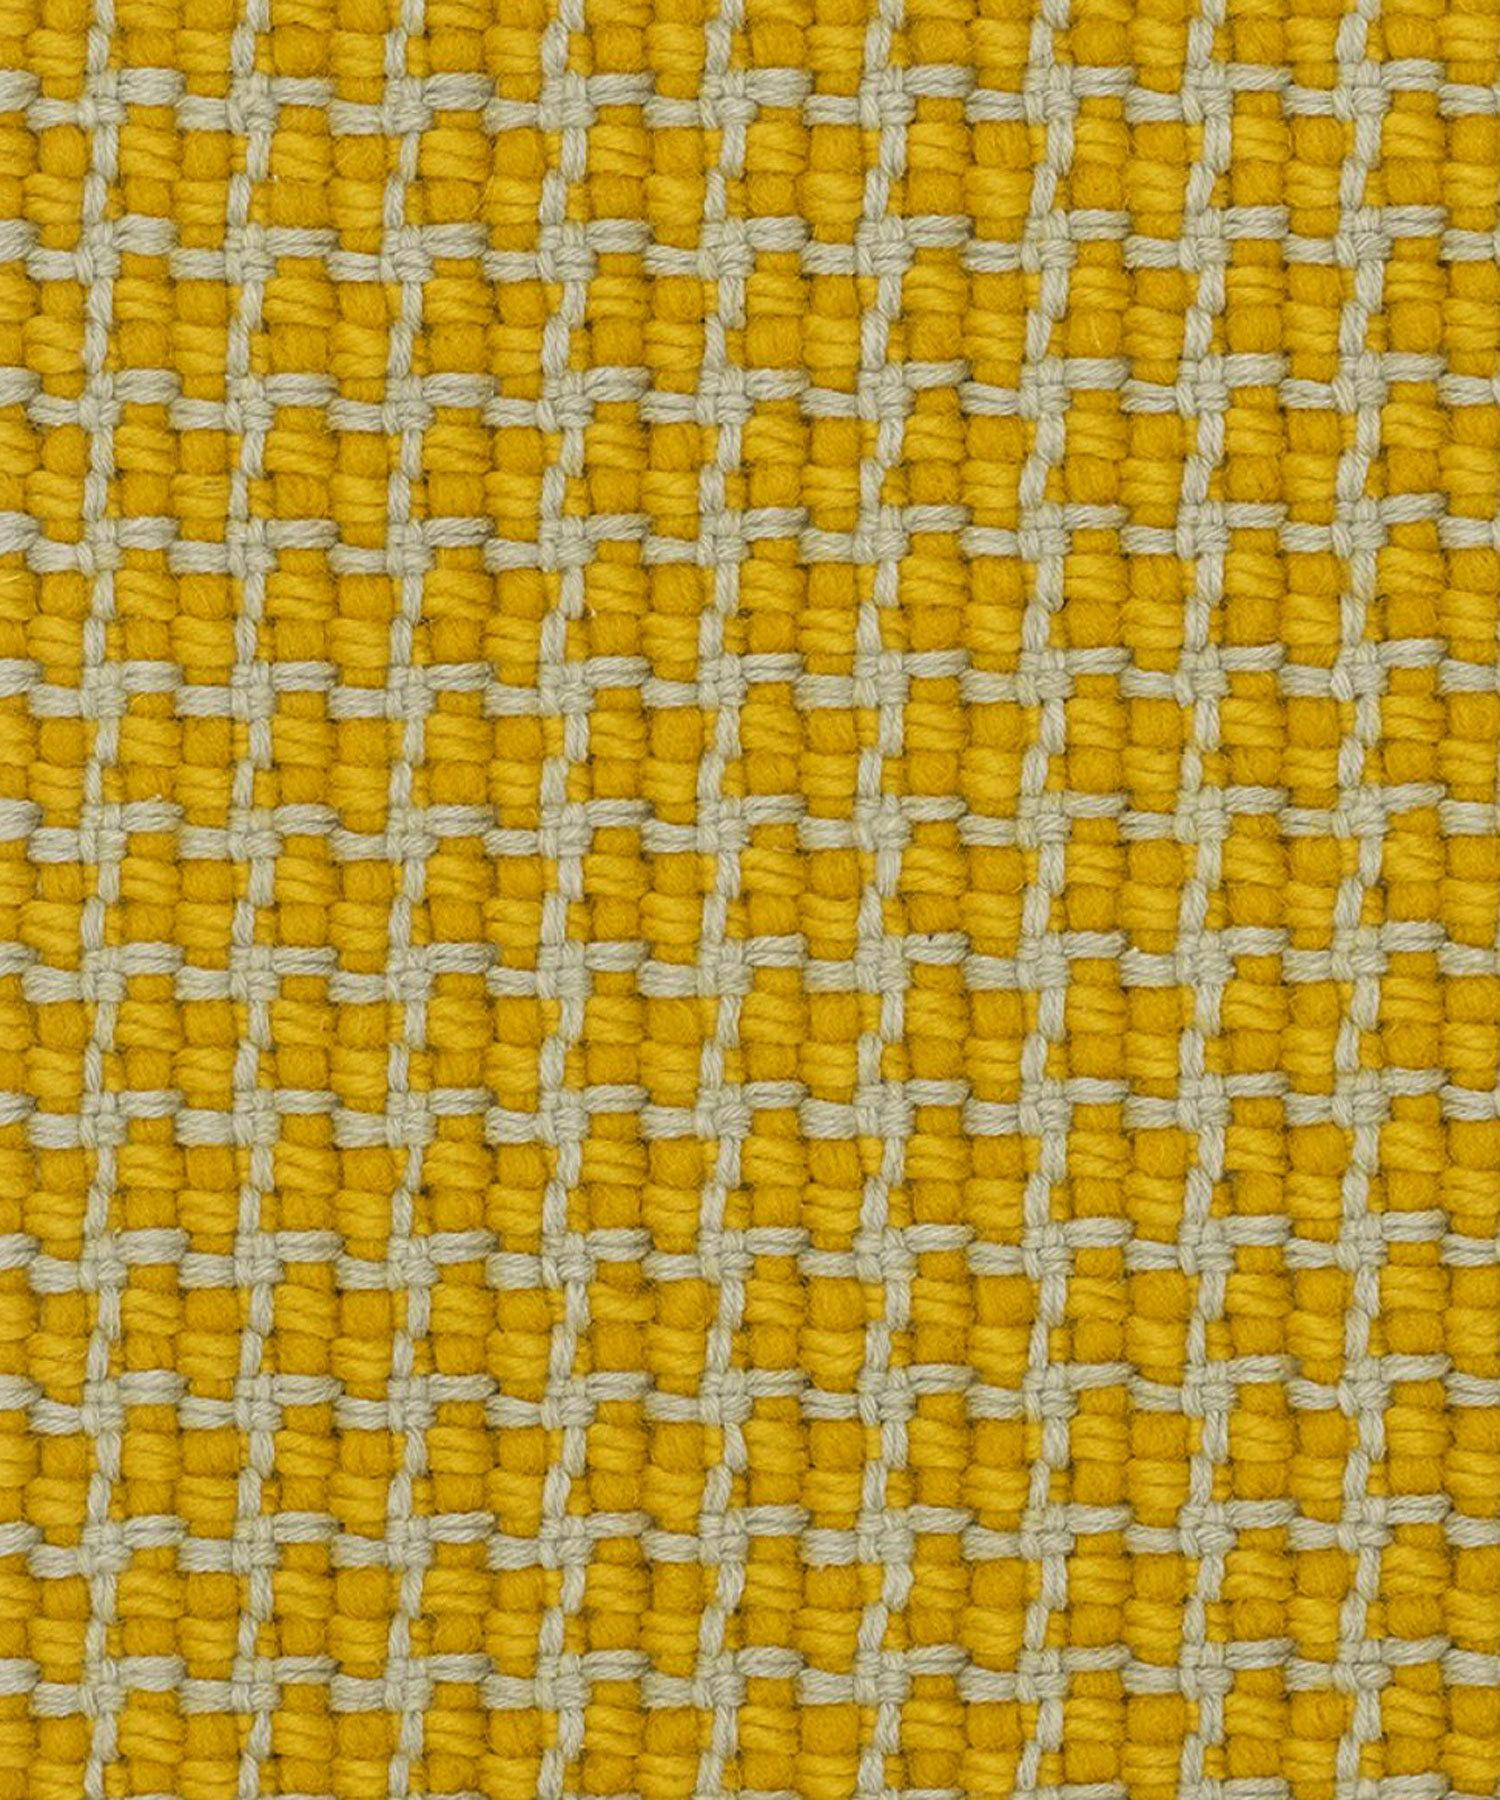 Lattice rug by Hella Jongerius, 21st century.

Wool-cotton blend, thick weave rug in the 410 colorway produced by Maharam.